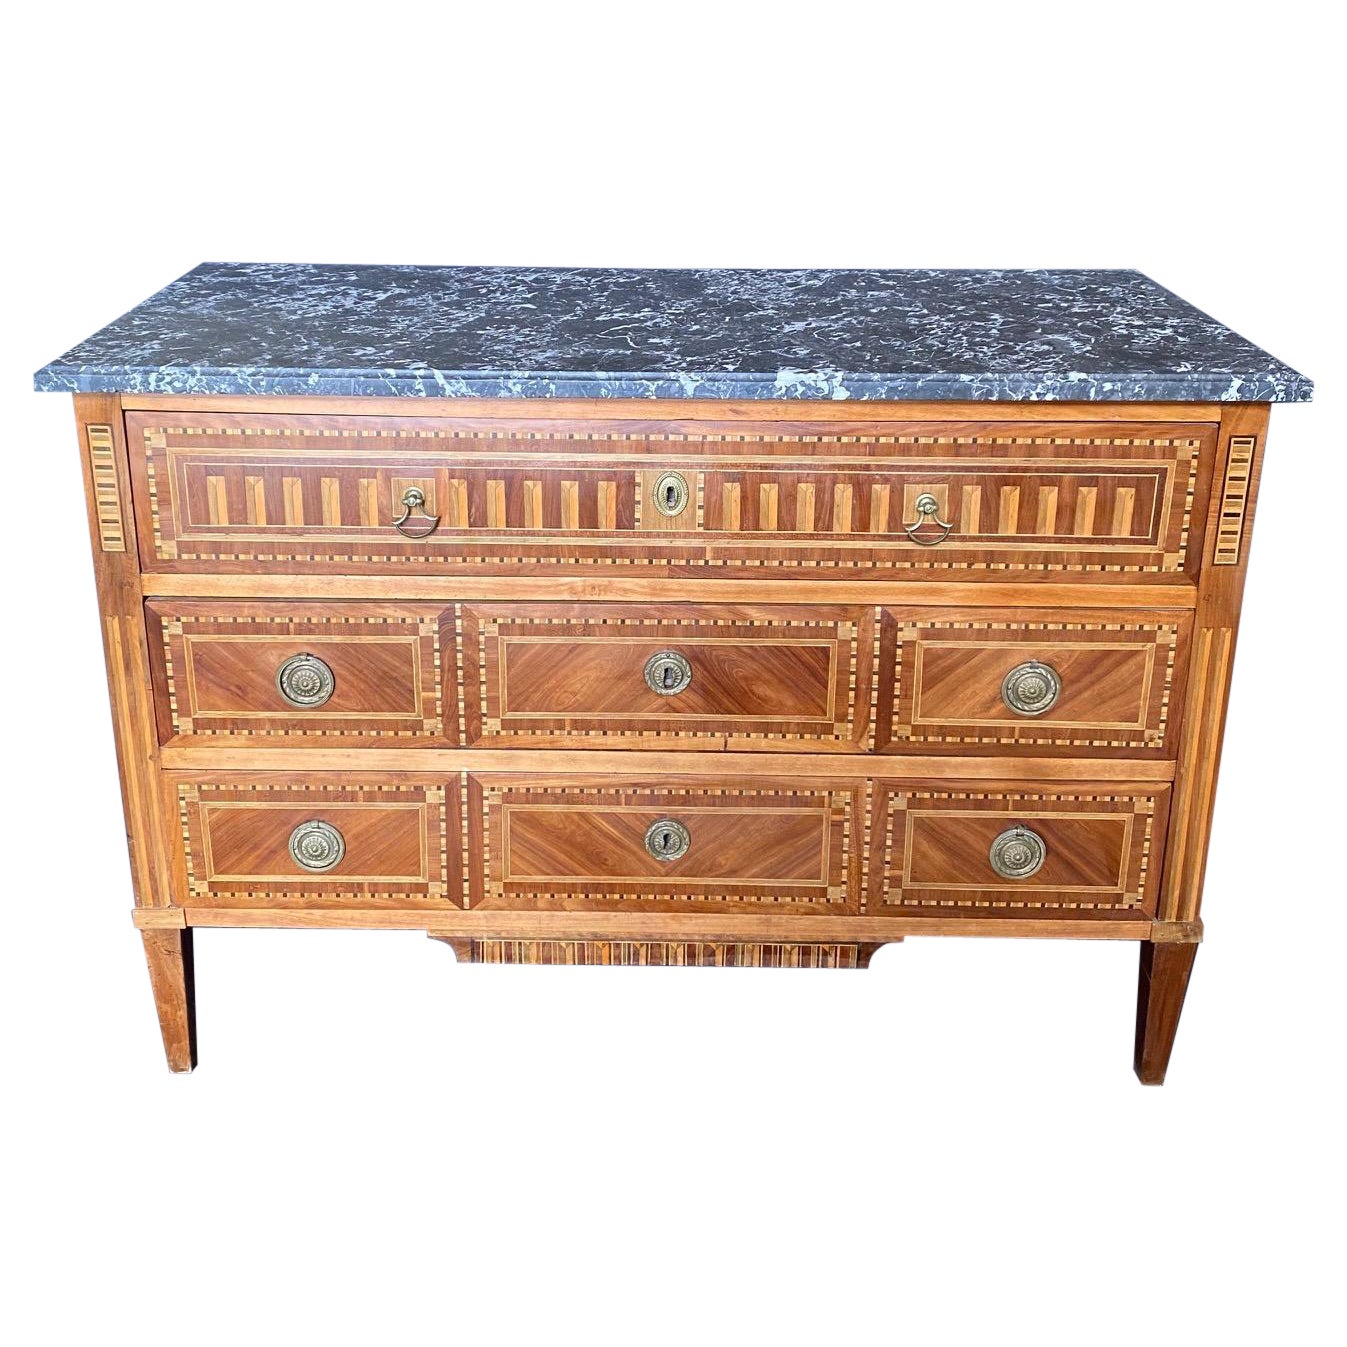 Late 18th Century French Neoclassical Louis XVI Inlaid Walnut Marble Top Commode